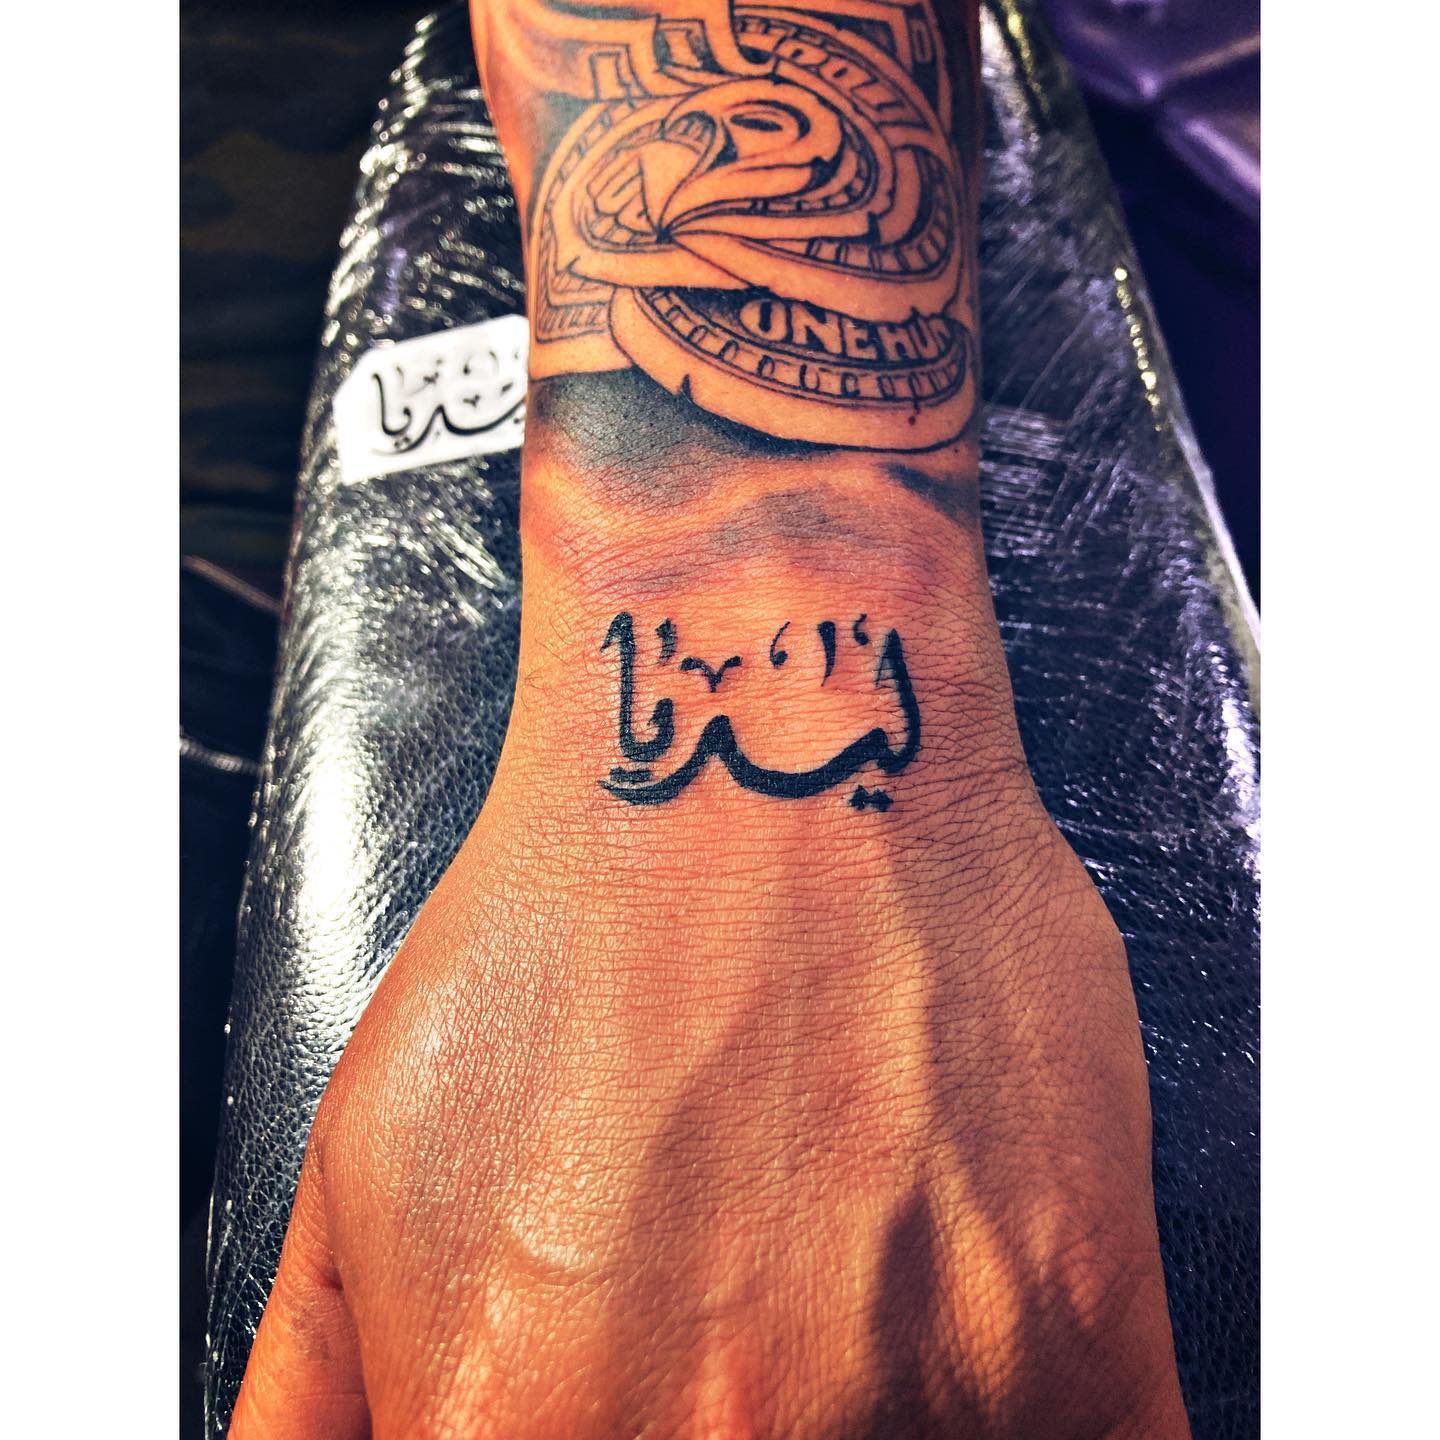 The Top 18 Arabic Tattoo Ideas - [2021 Inspiration Guide]